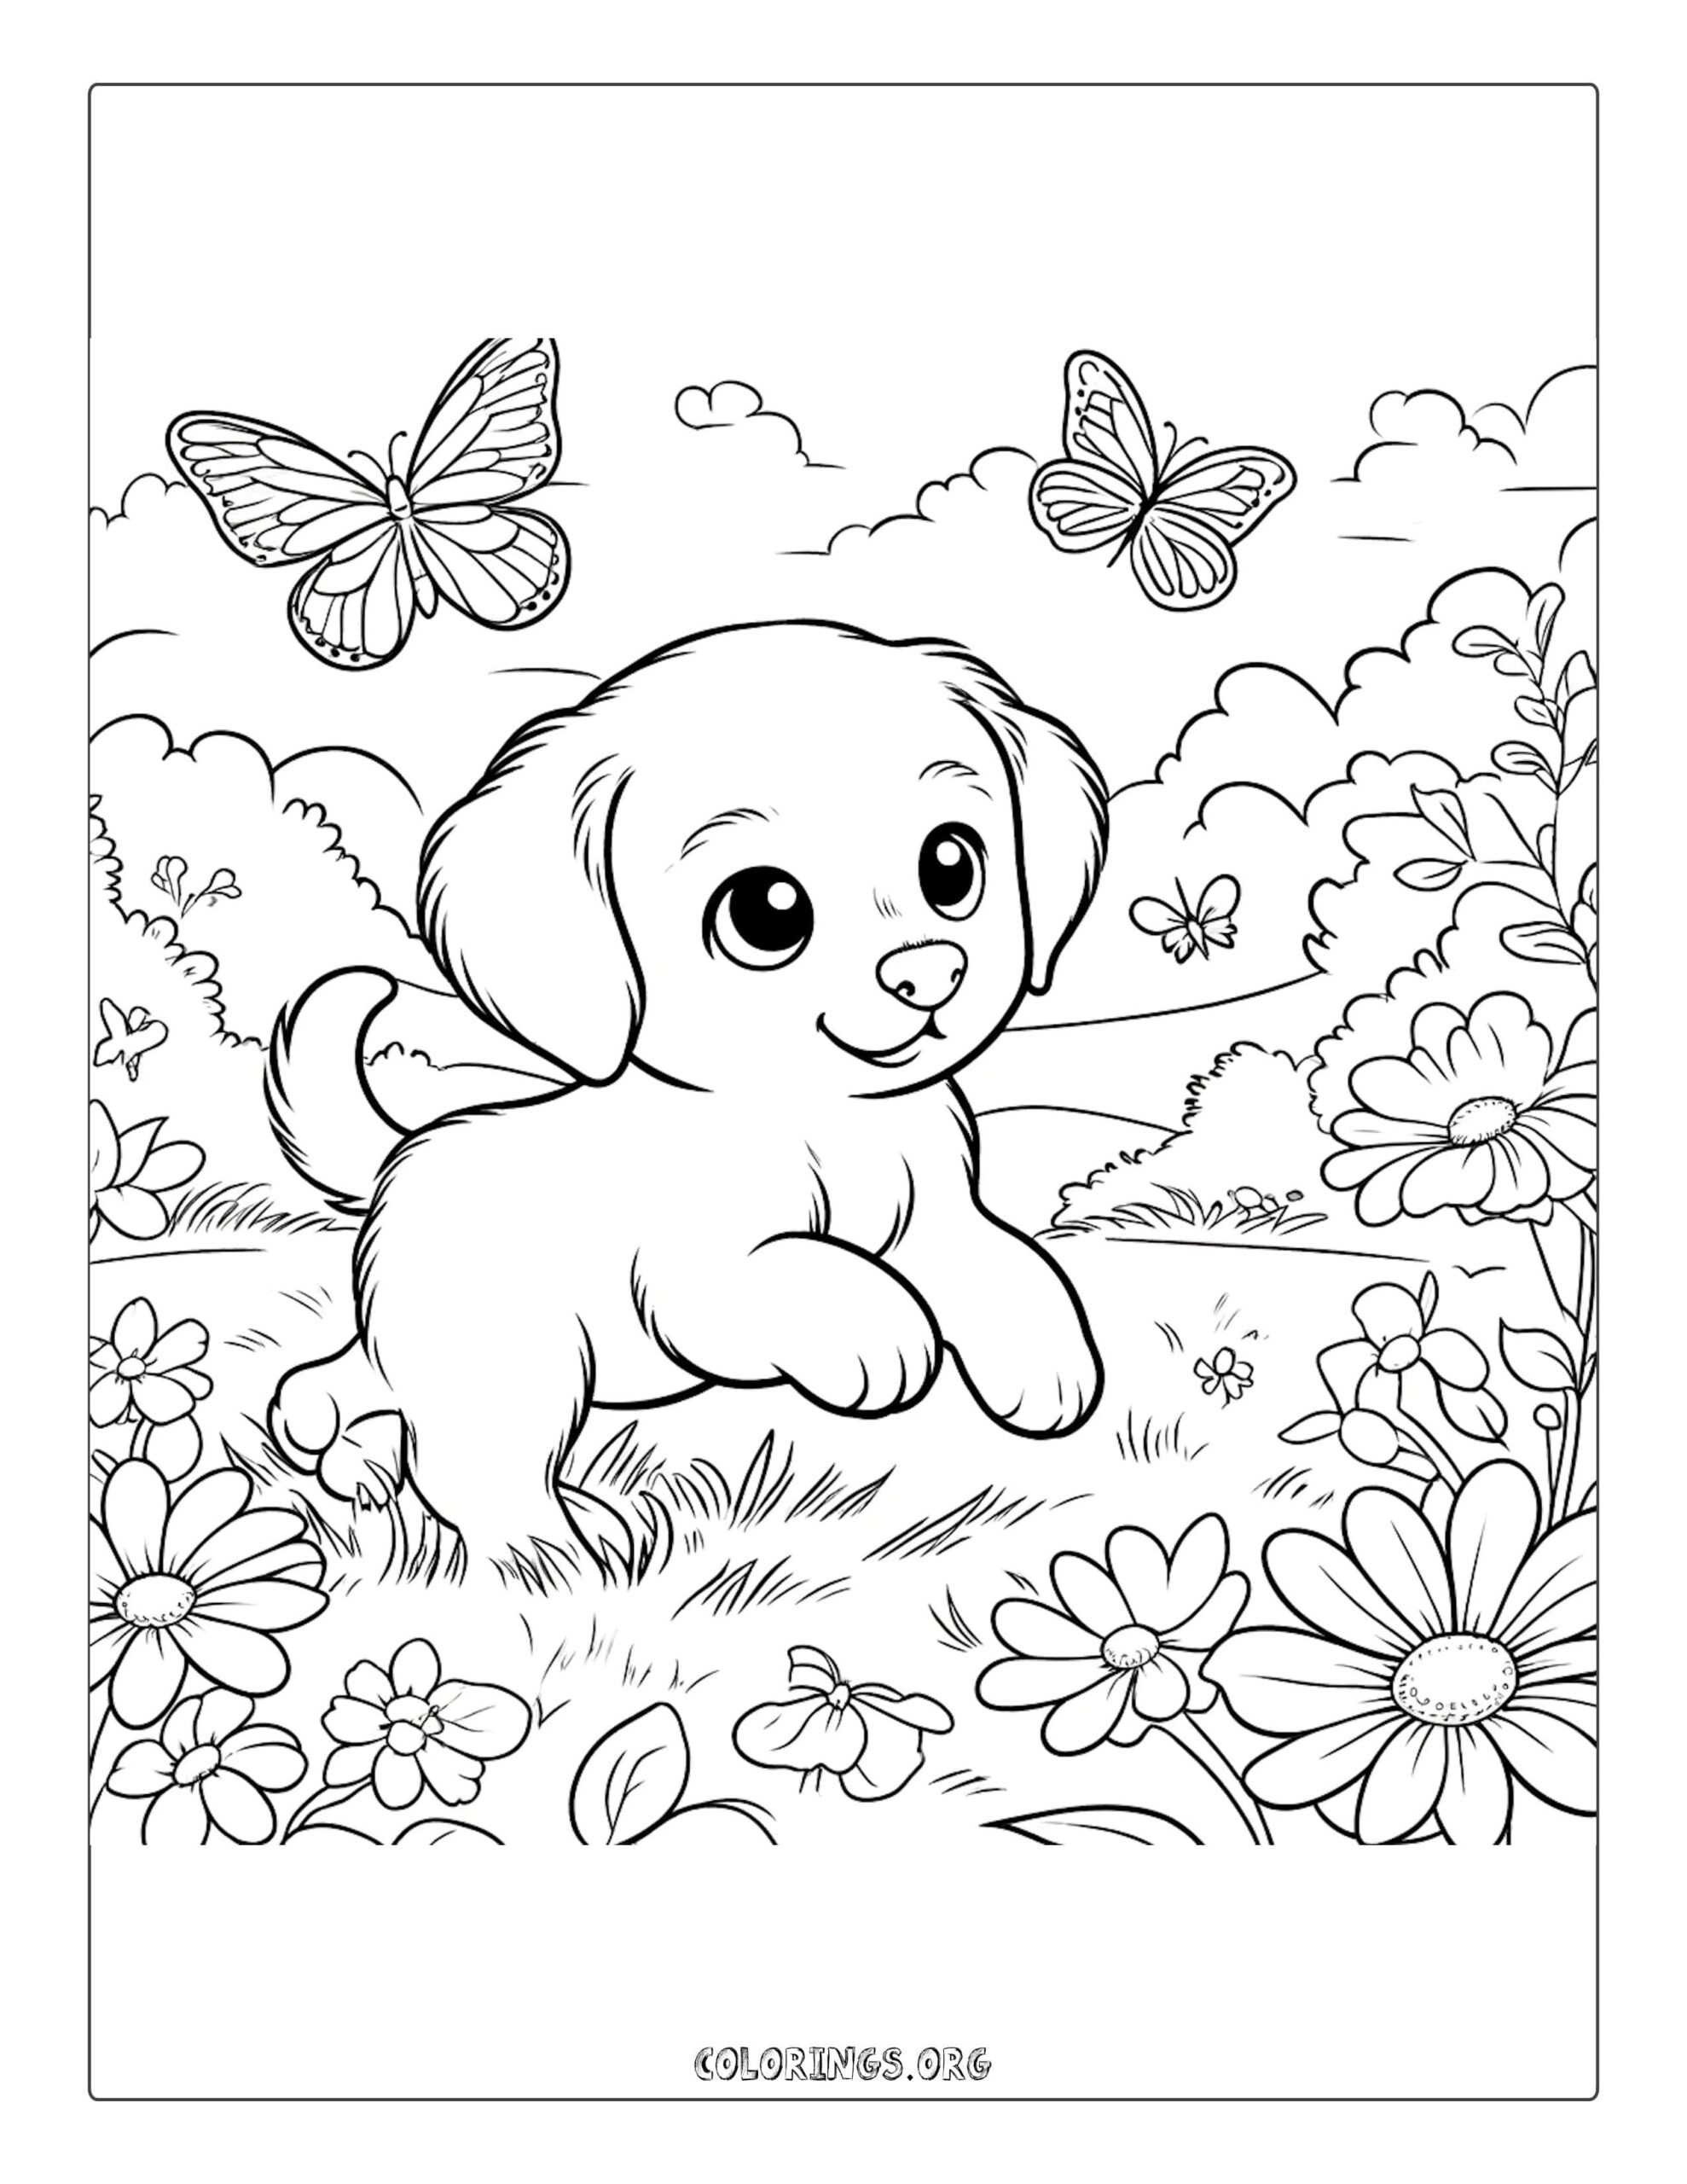 Playful puppy in meadow coloring page